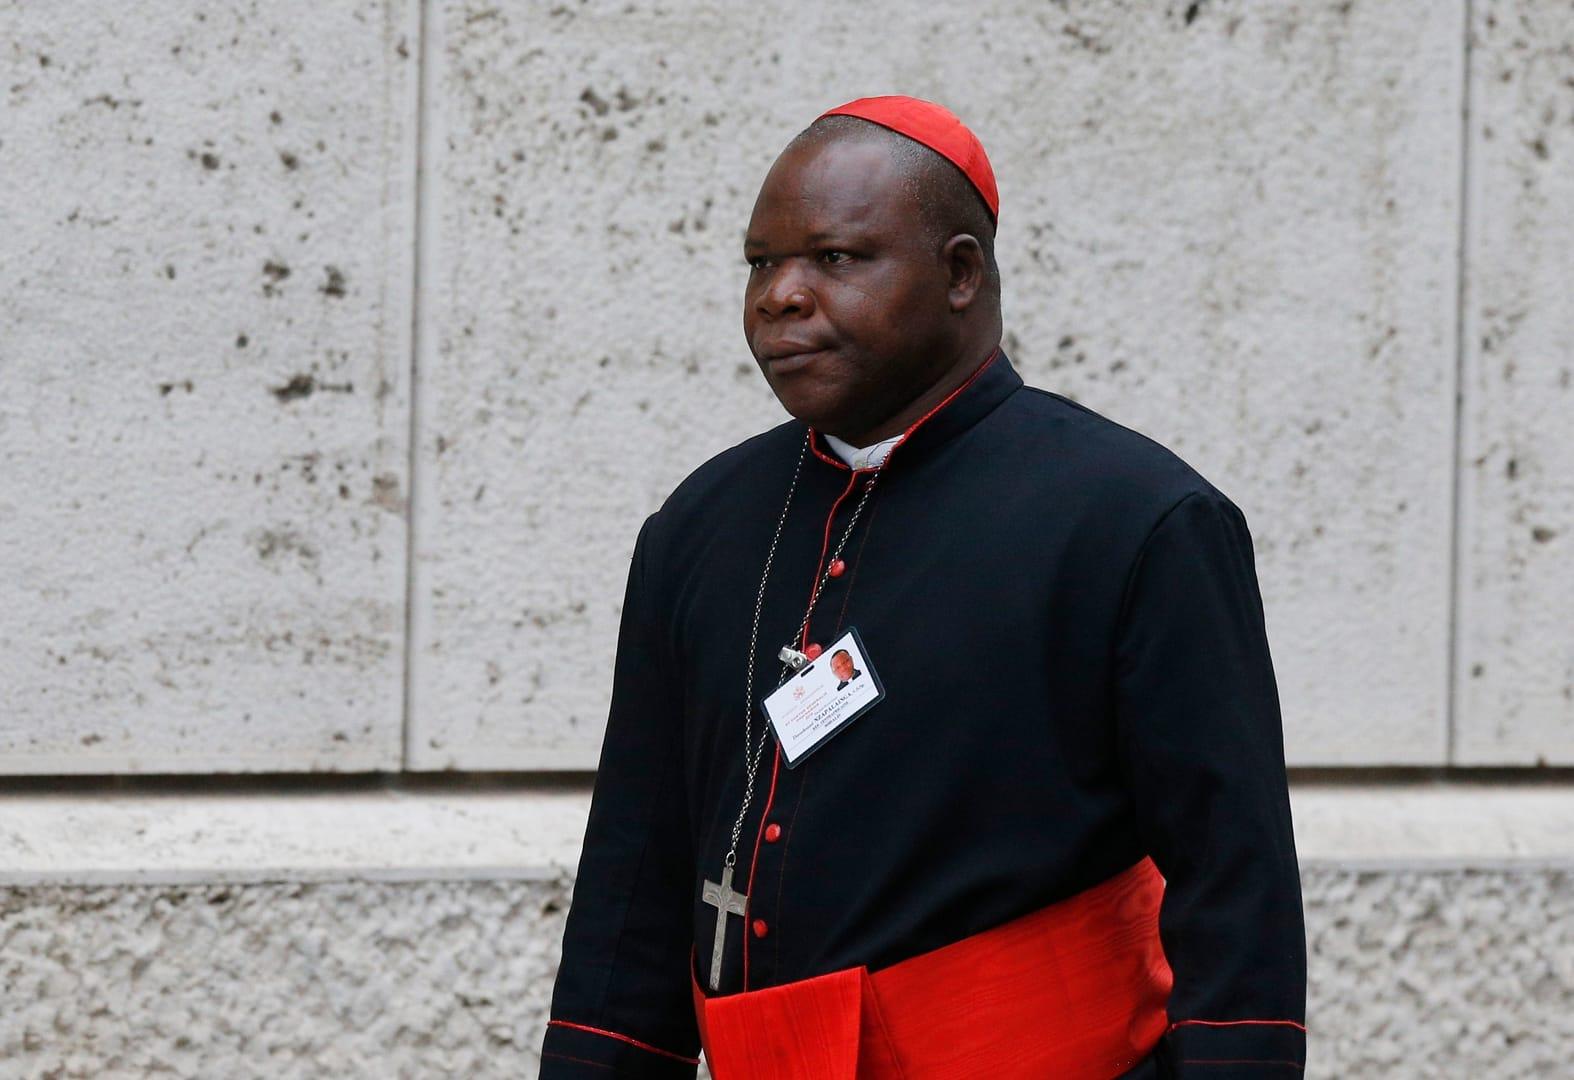 Cardinal warns against Russia’s growing influence in Central African Republic